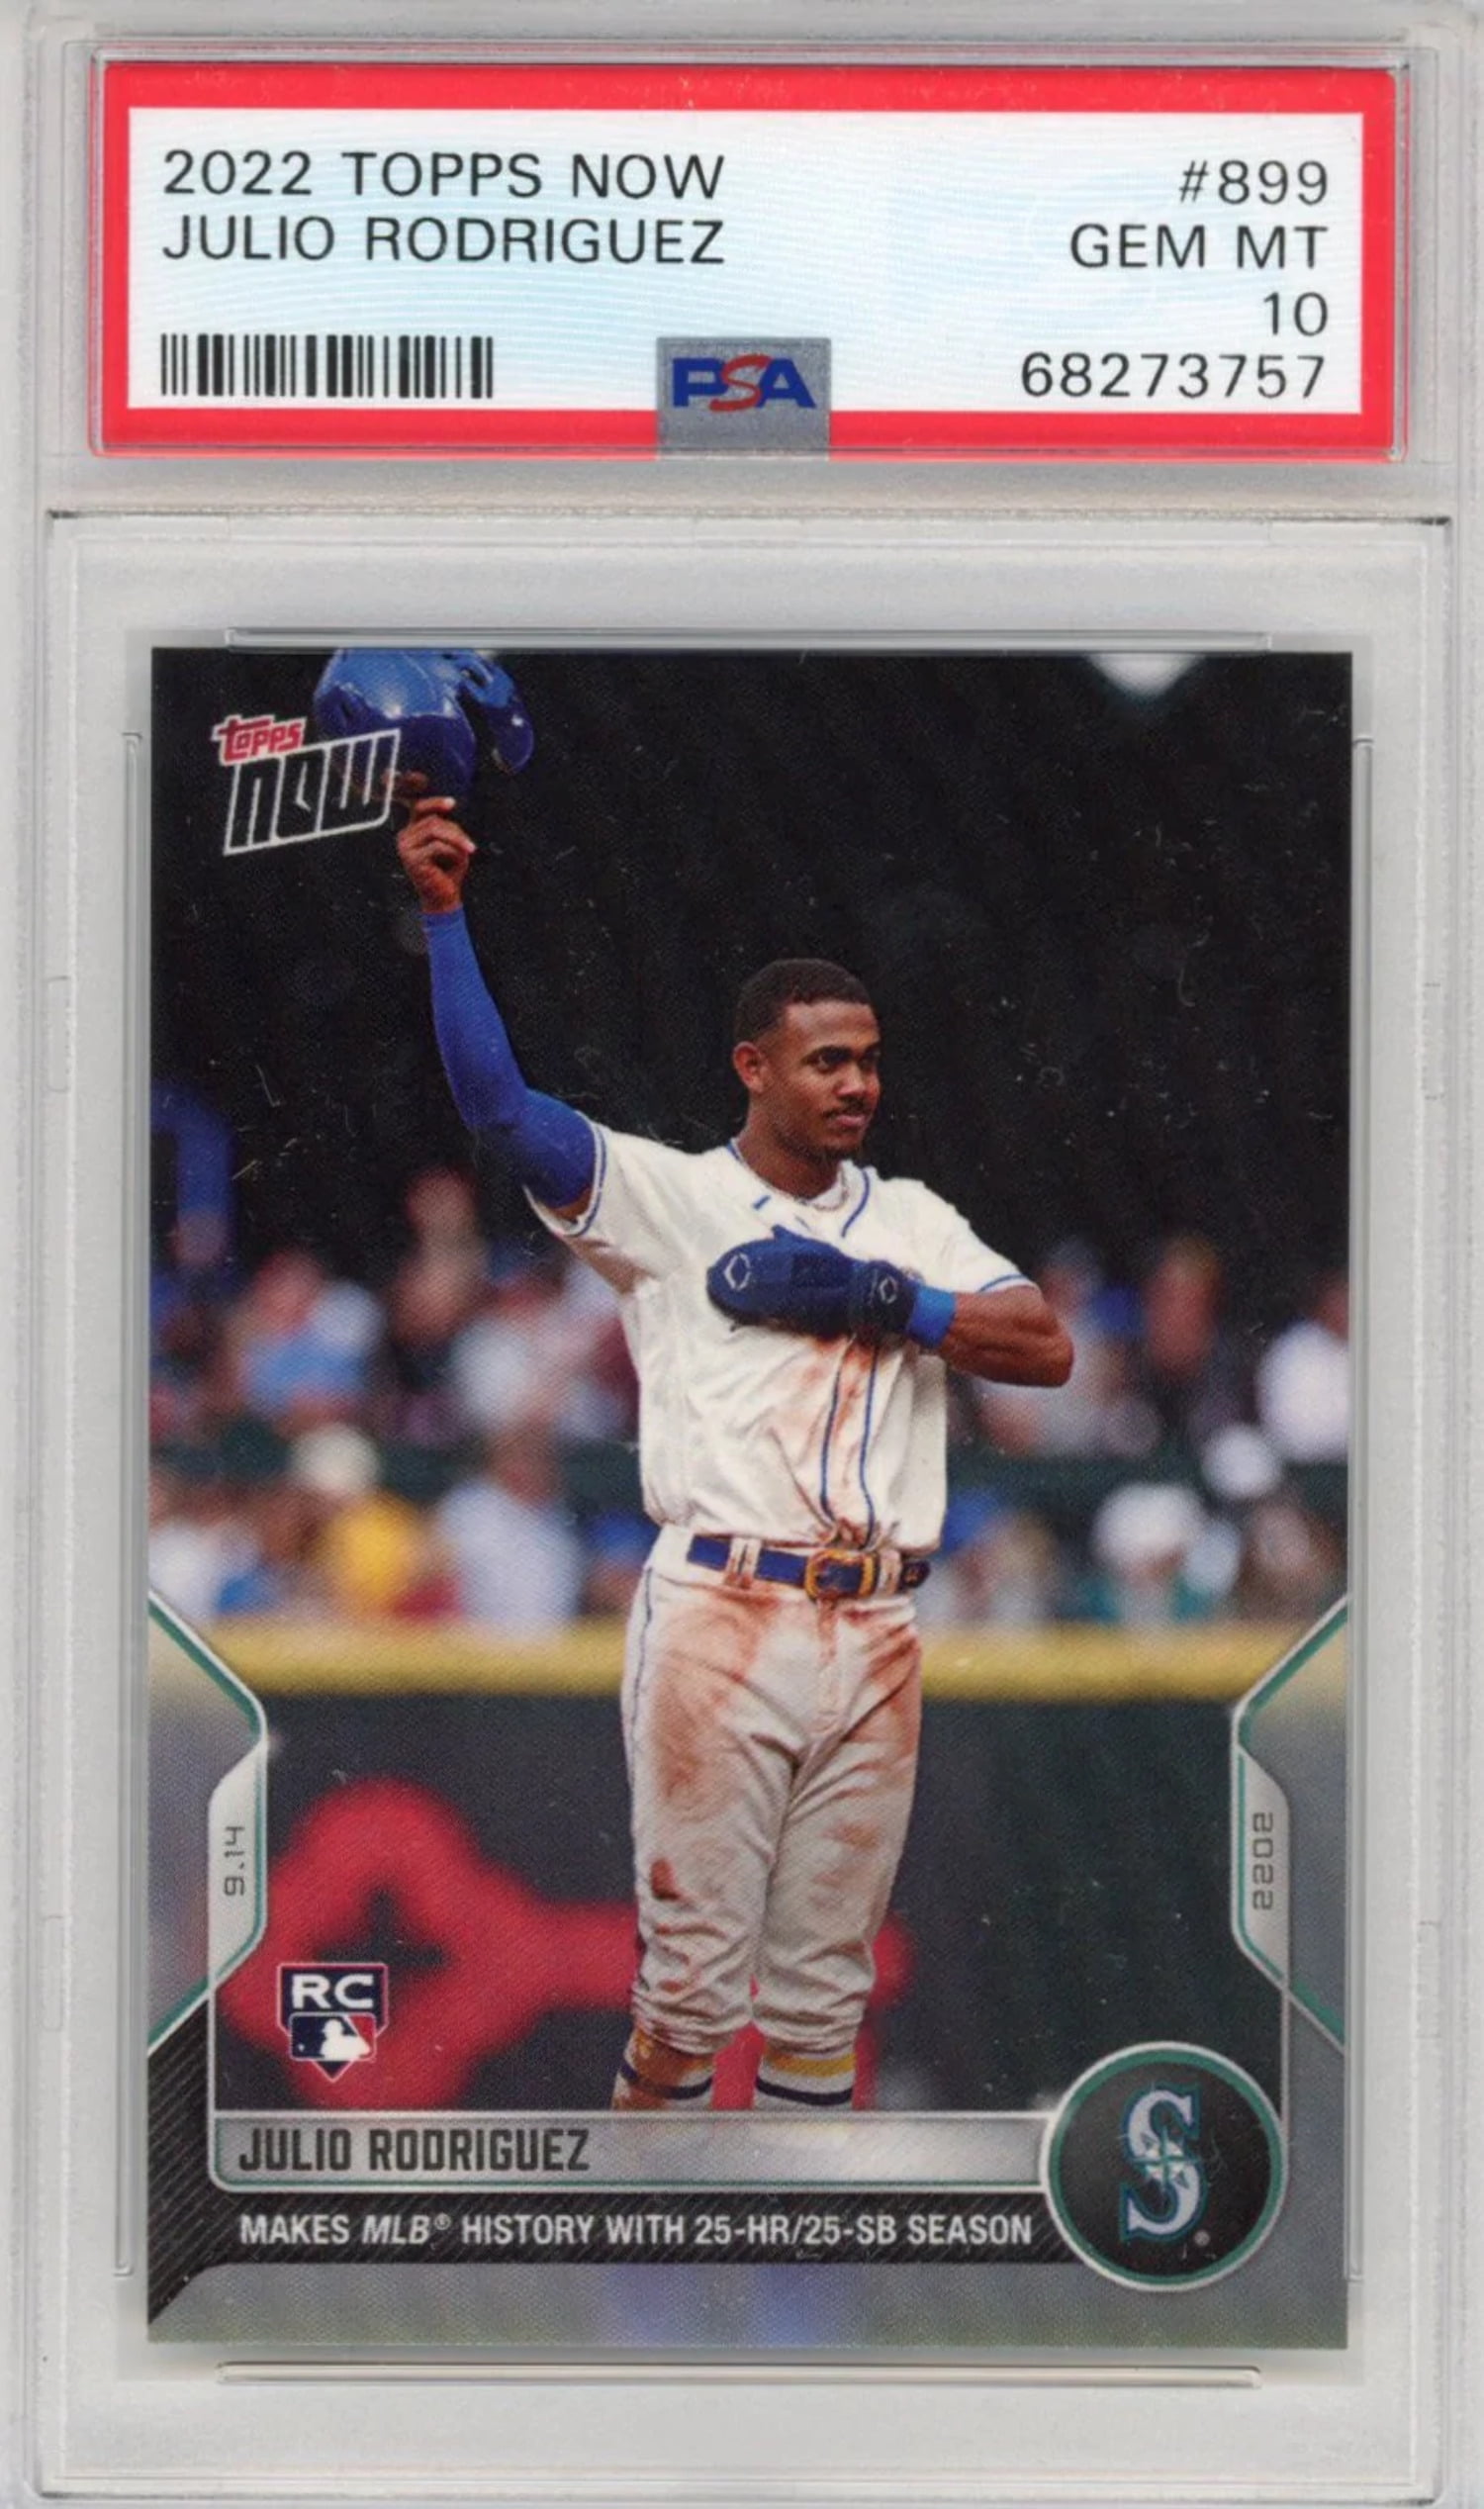 Graded 2022 Topps Now Julio Rodriguez #899 Rookie RC Baseball Card